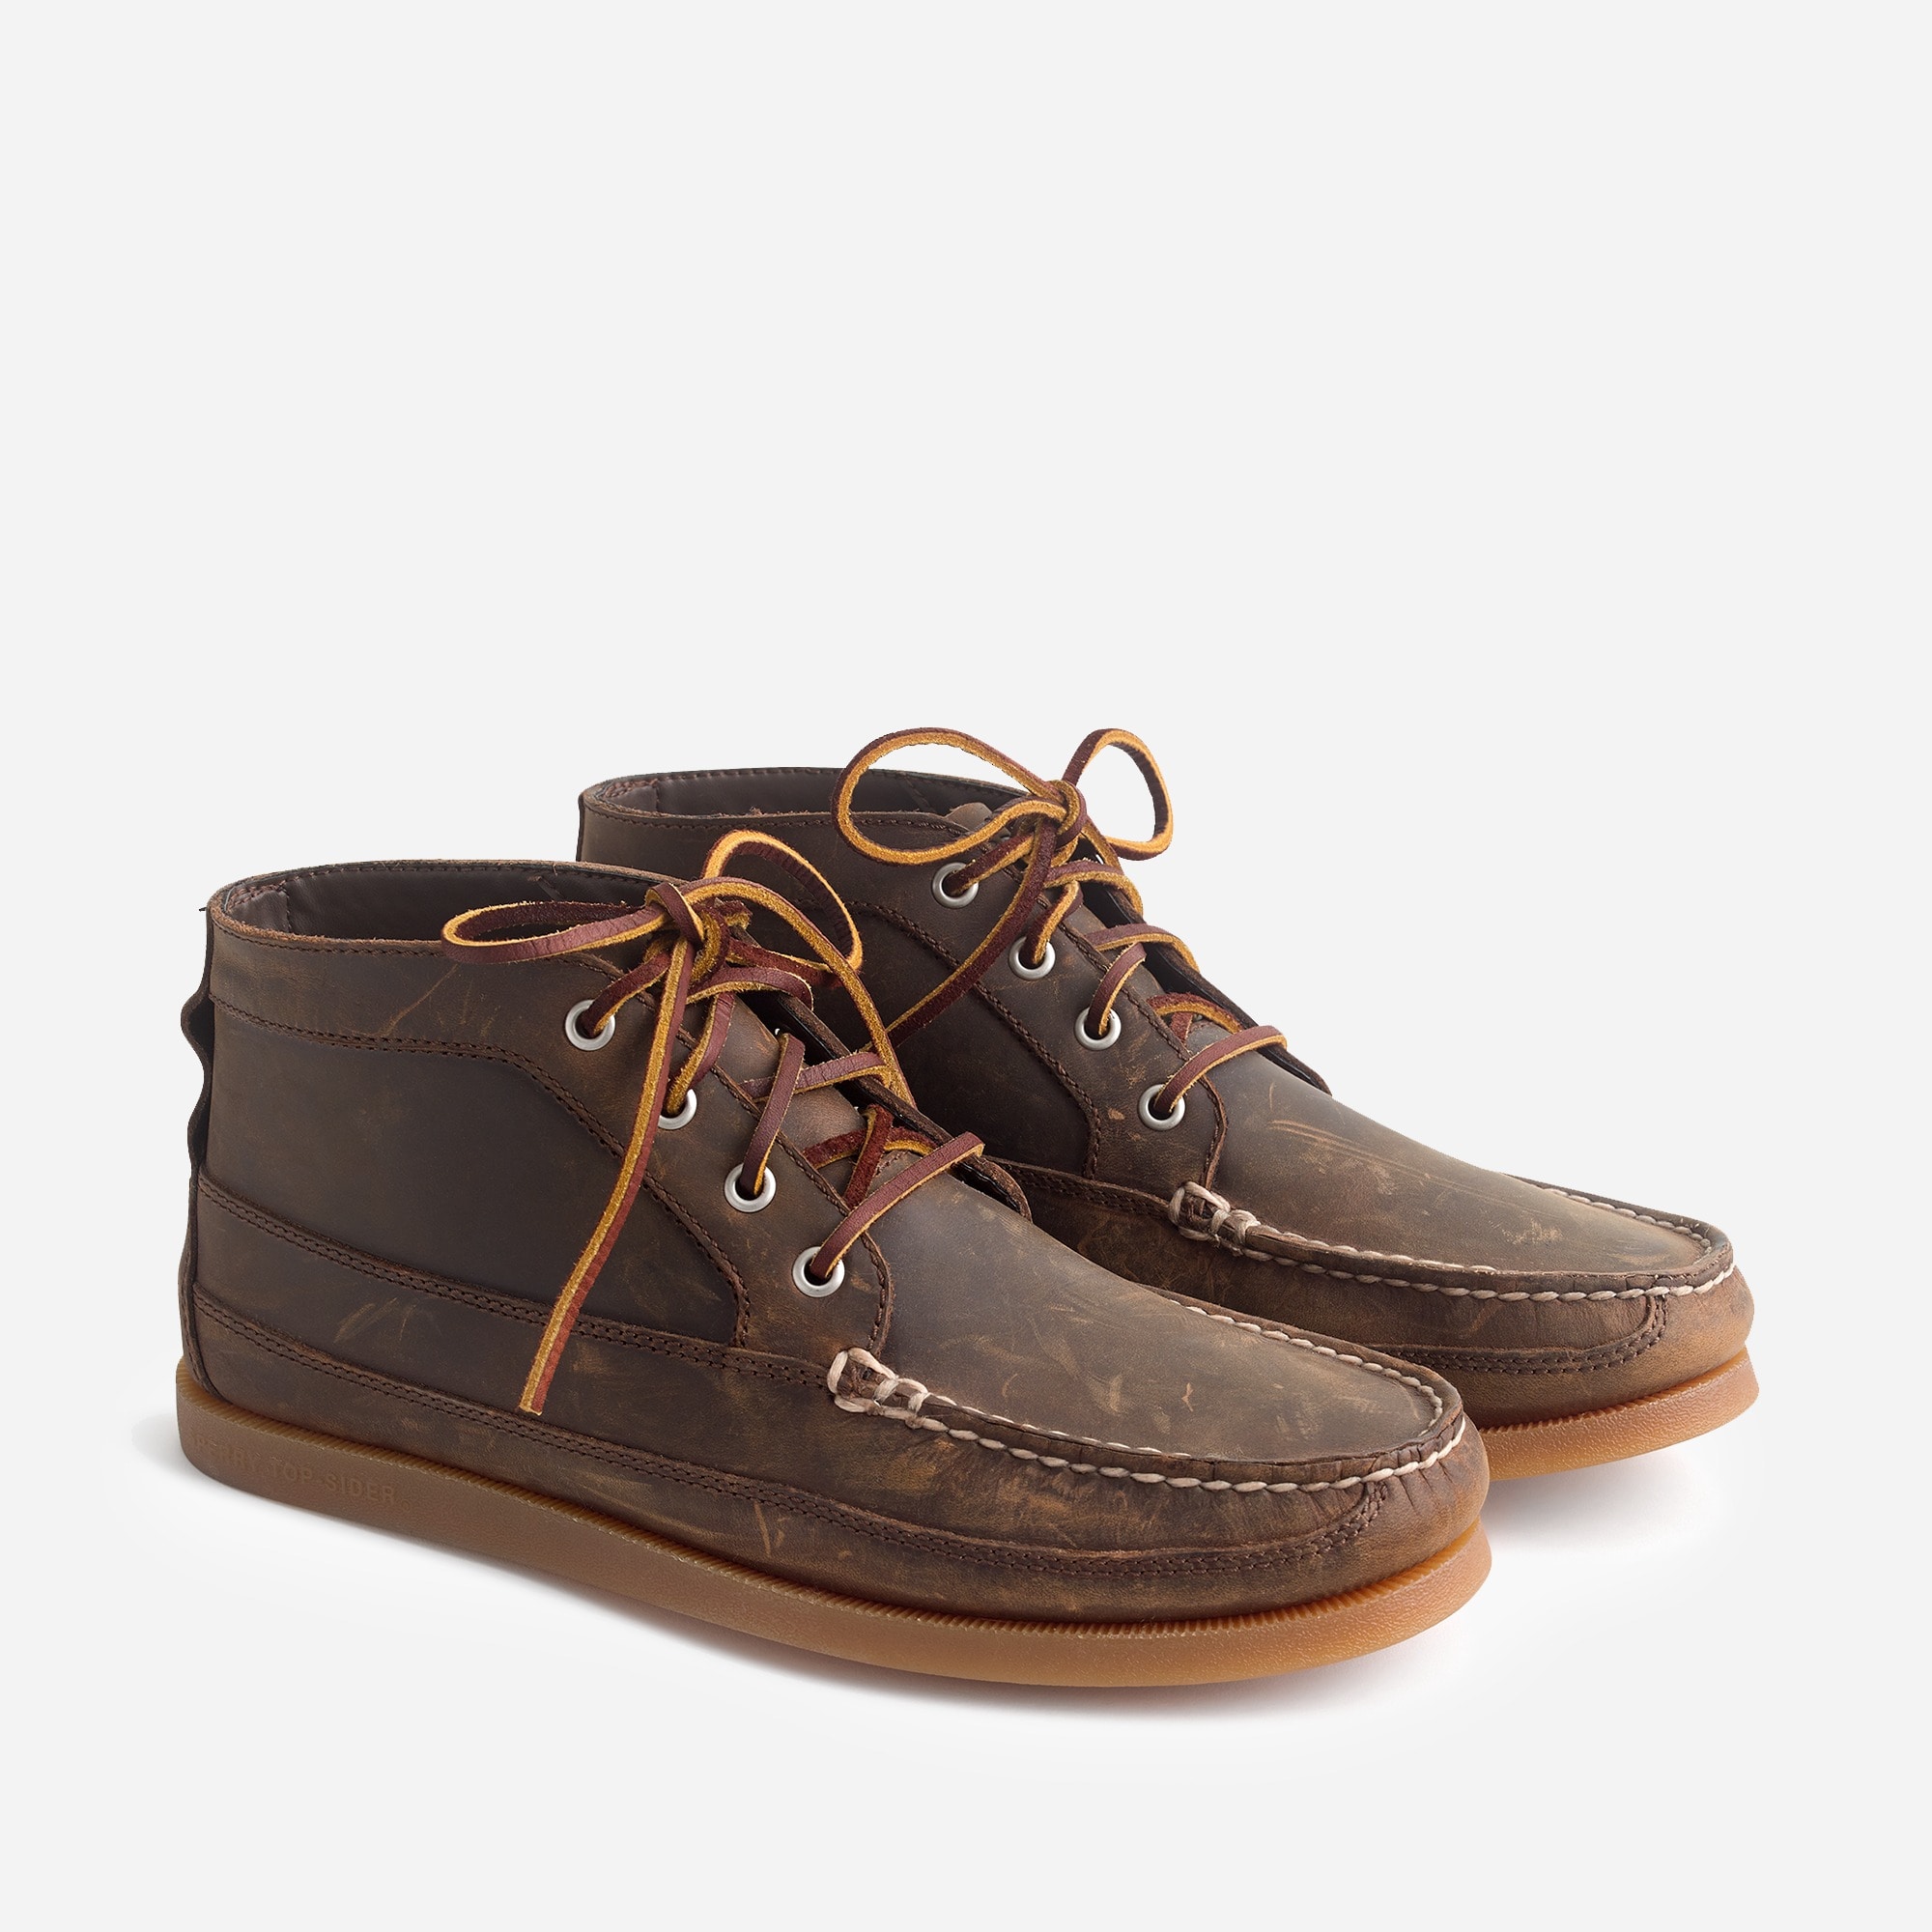 sperry boots